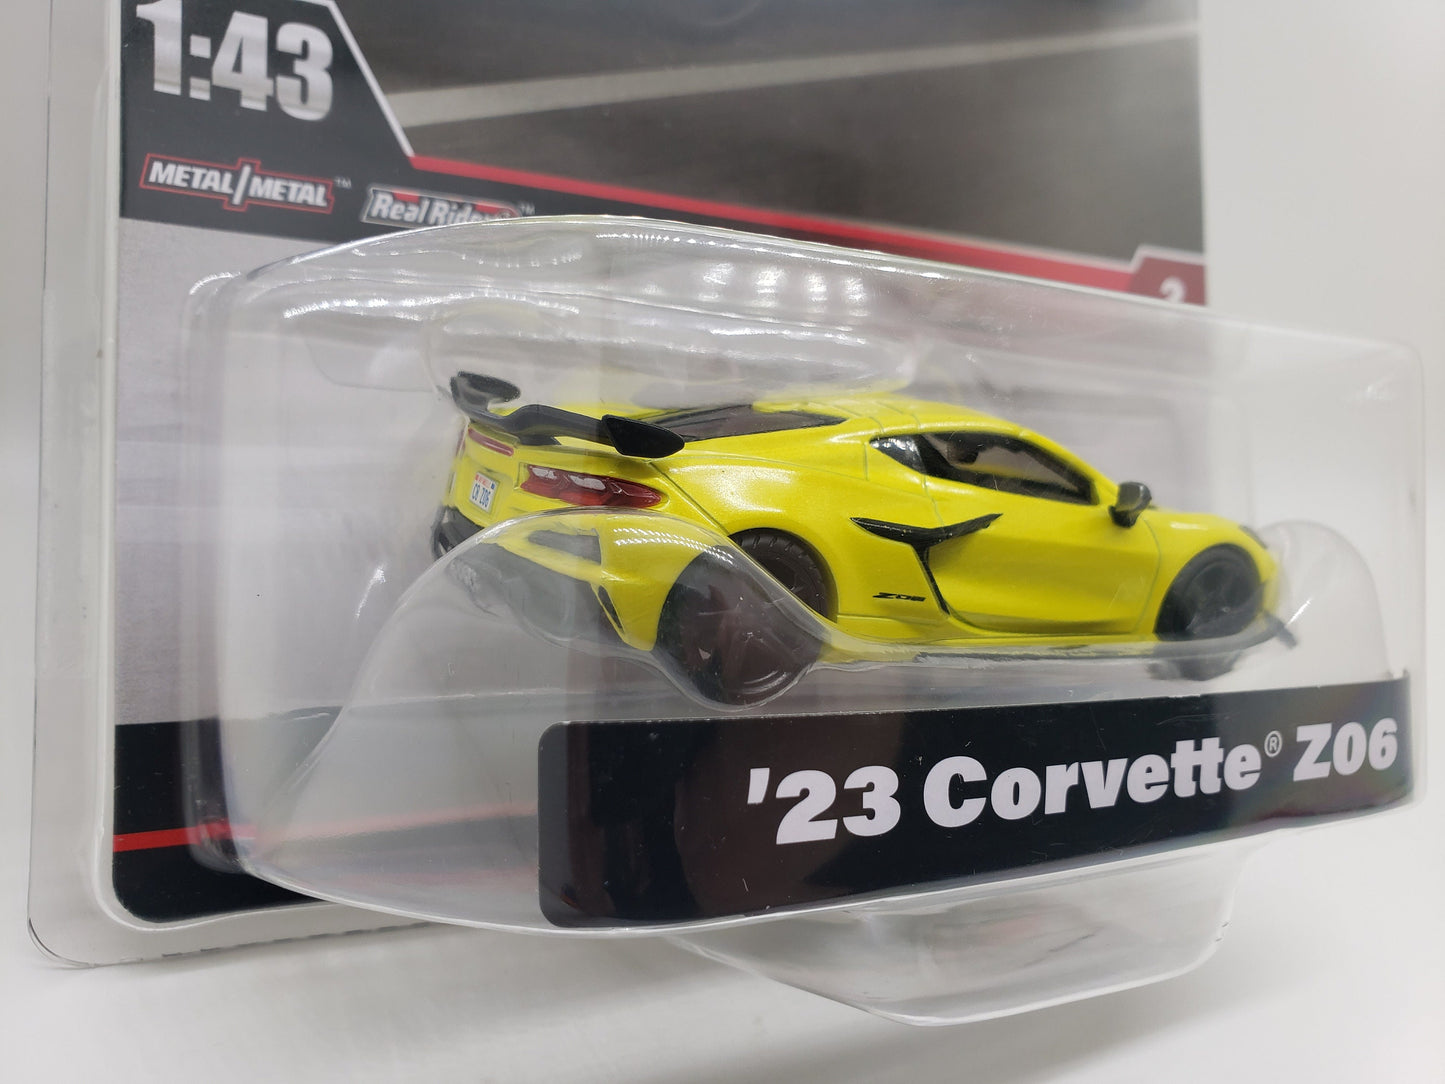 Hot Wheels 23 Corvette ZO6 Accelerate Yellow Perfect Birthday Gift Miniature Collectable 143 Scale Model Toy Car